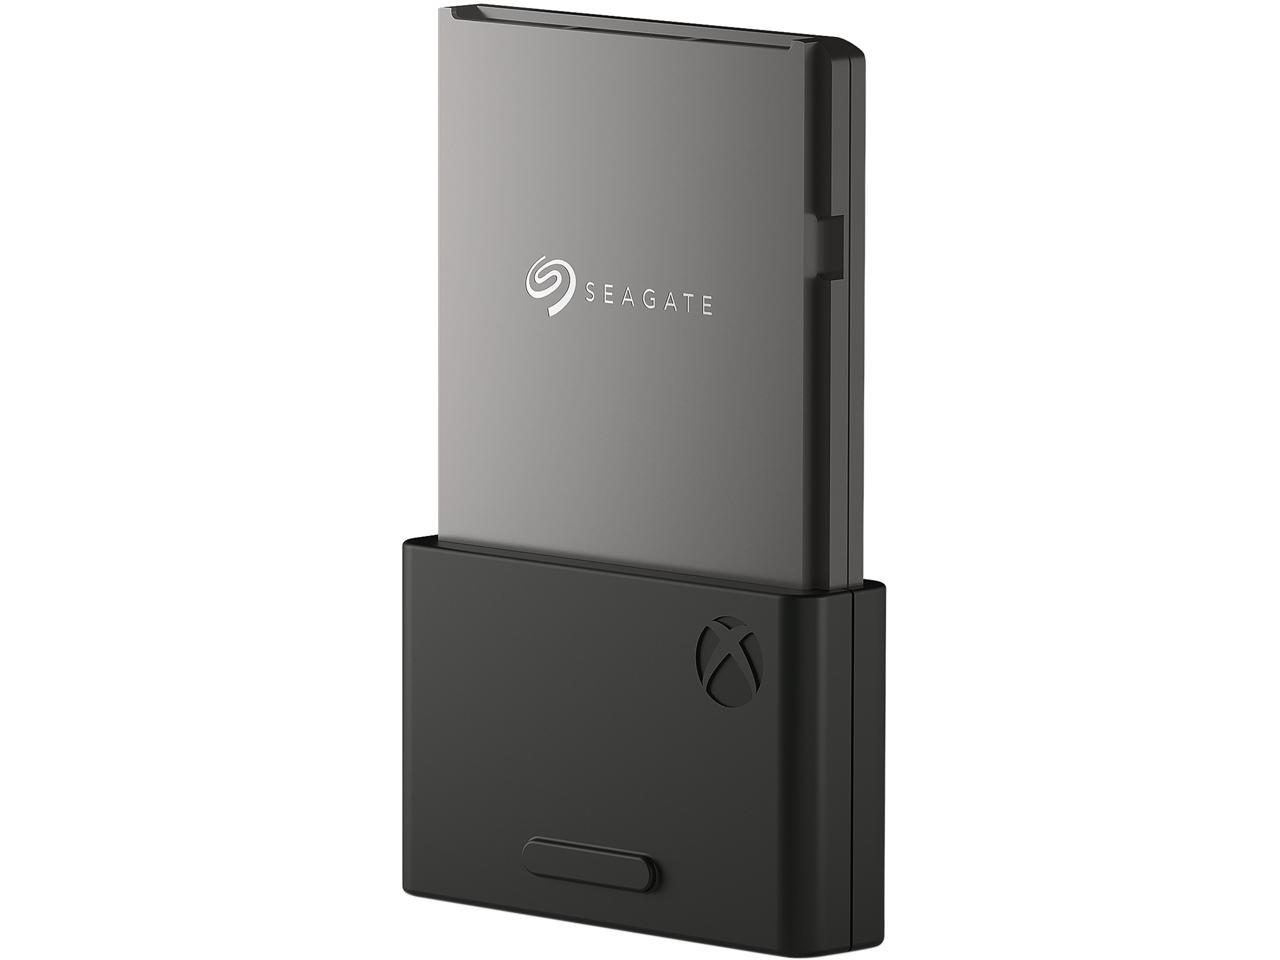 1TB Seagate Storage Expansion Card for Xbox Series X|S $190